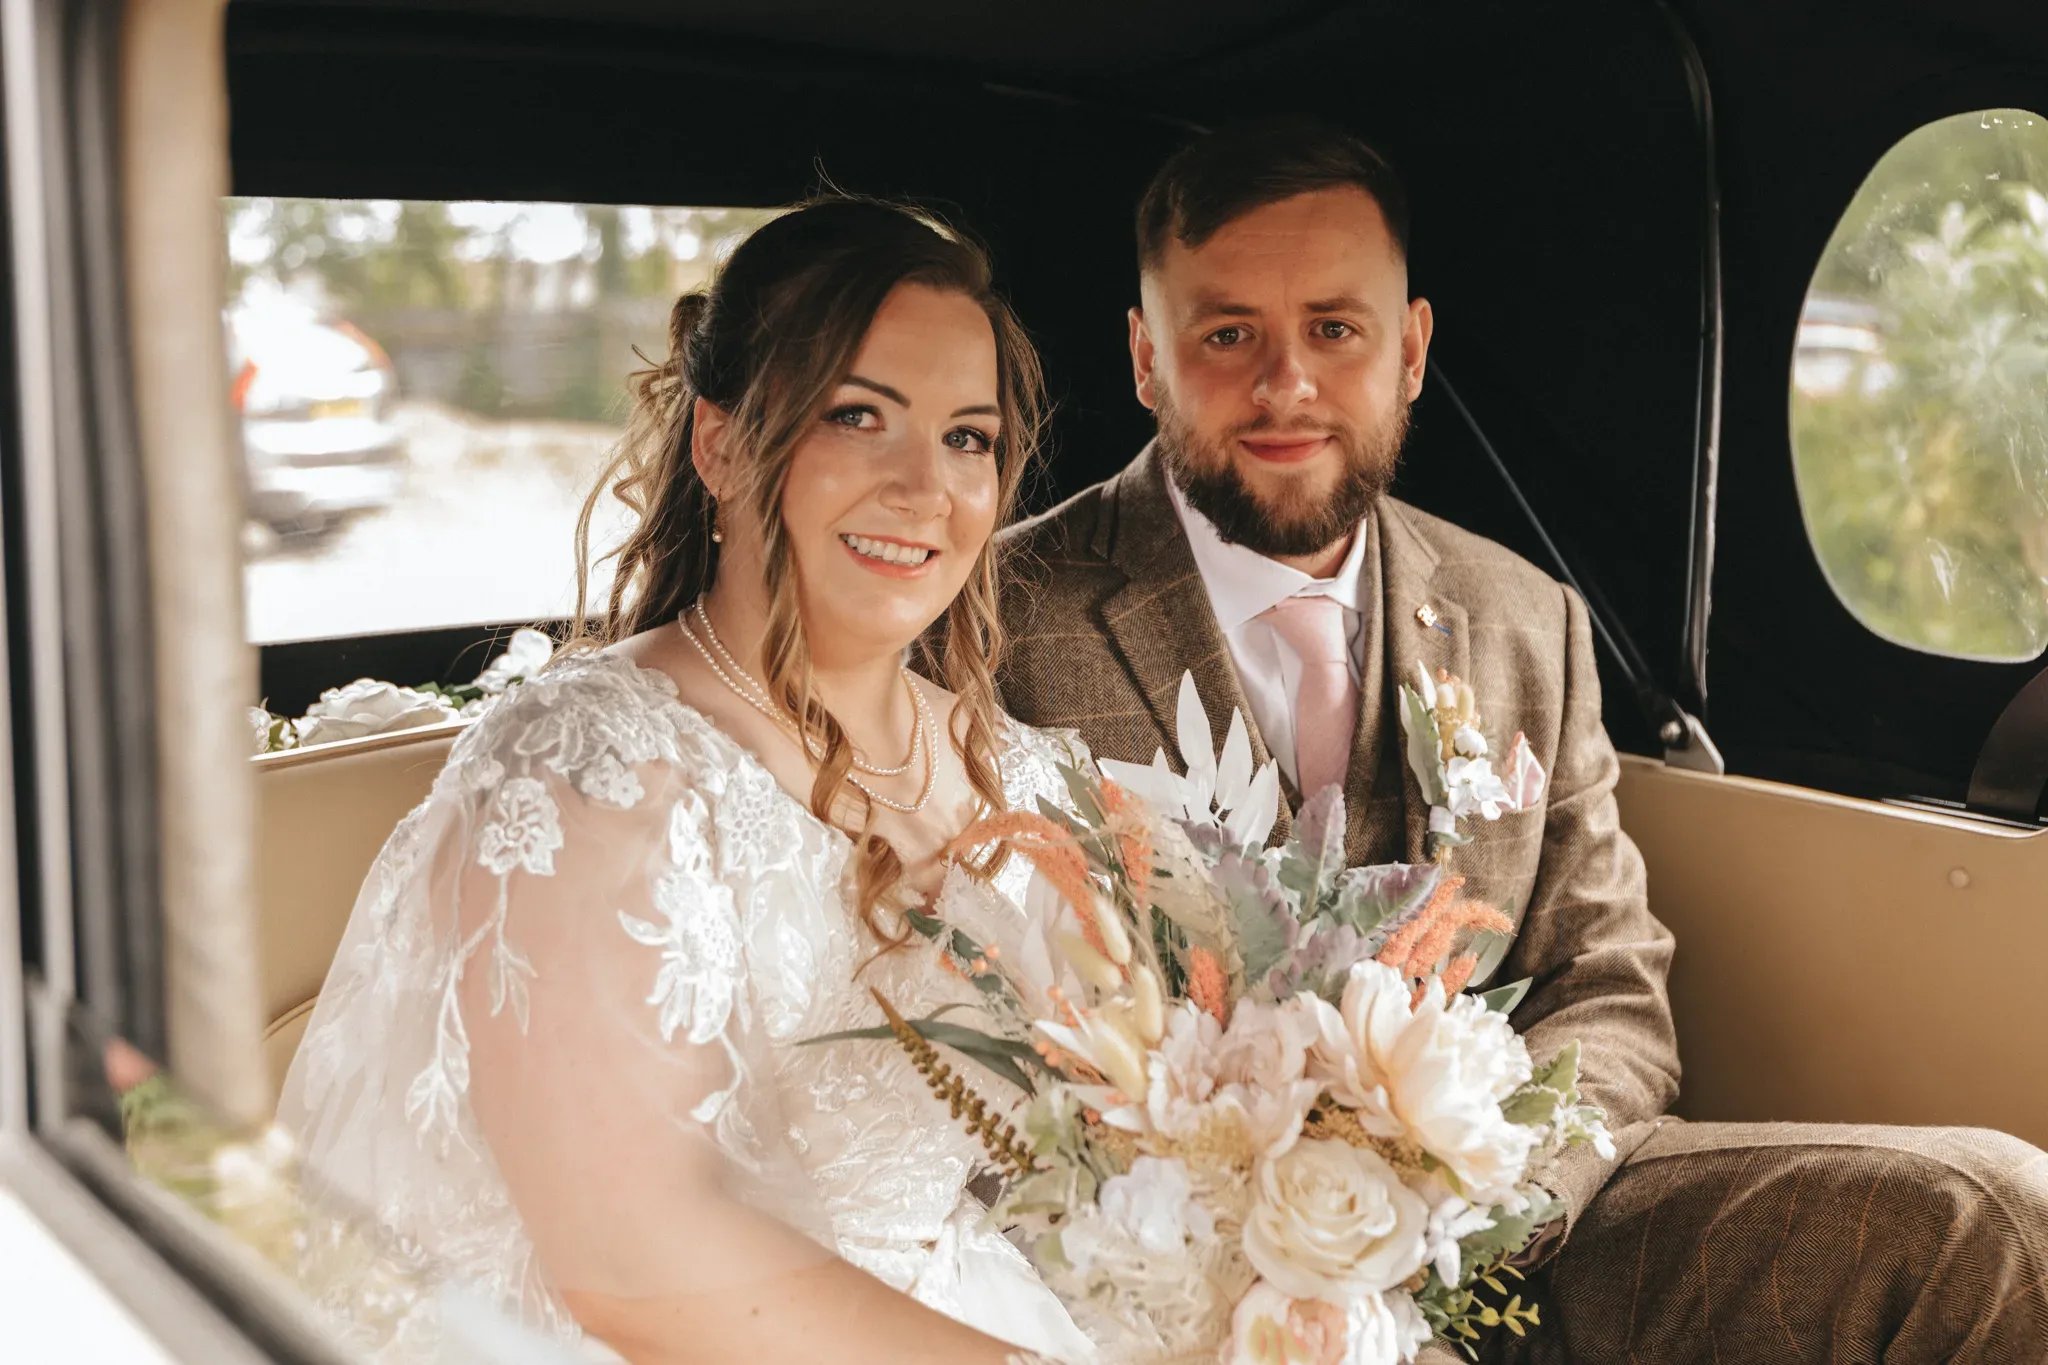 A bride and groom smiling inside a vintage car, the bride in a lacy dress holding a bouquet of white and peach flowers, the groom in a tweed suit with a pink tie.